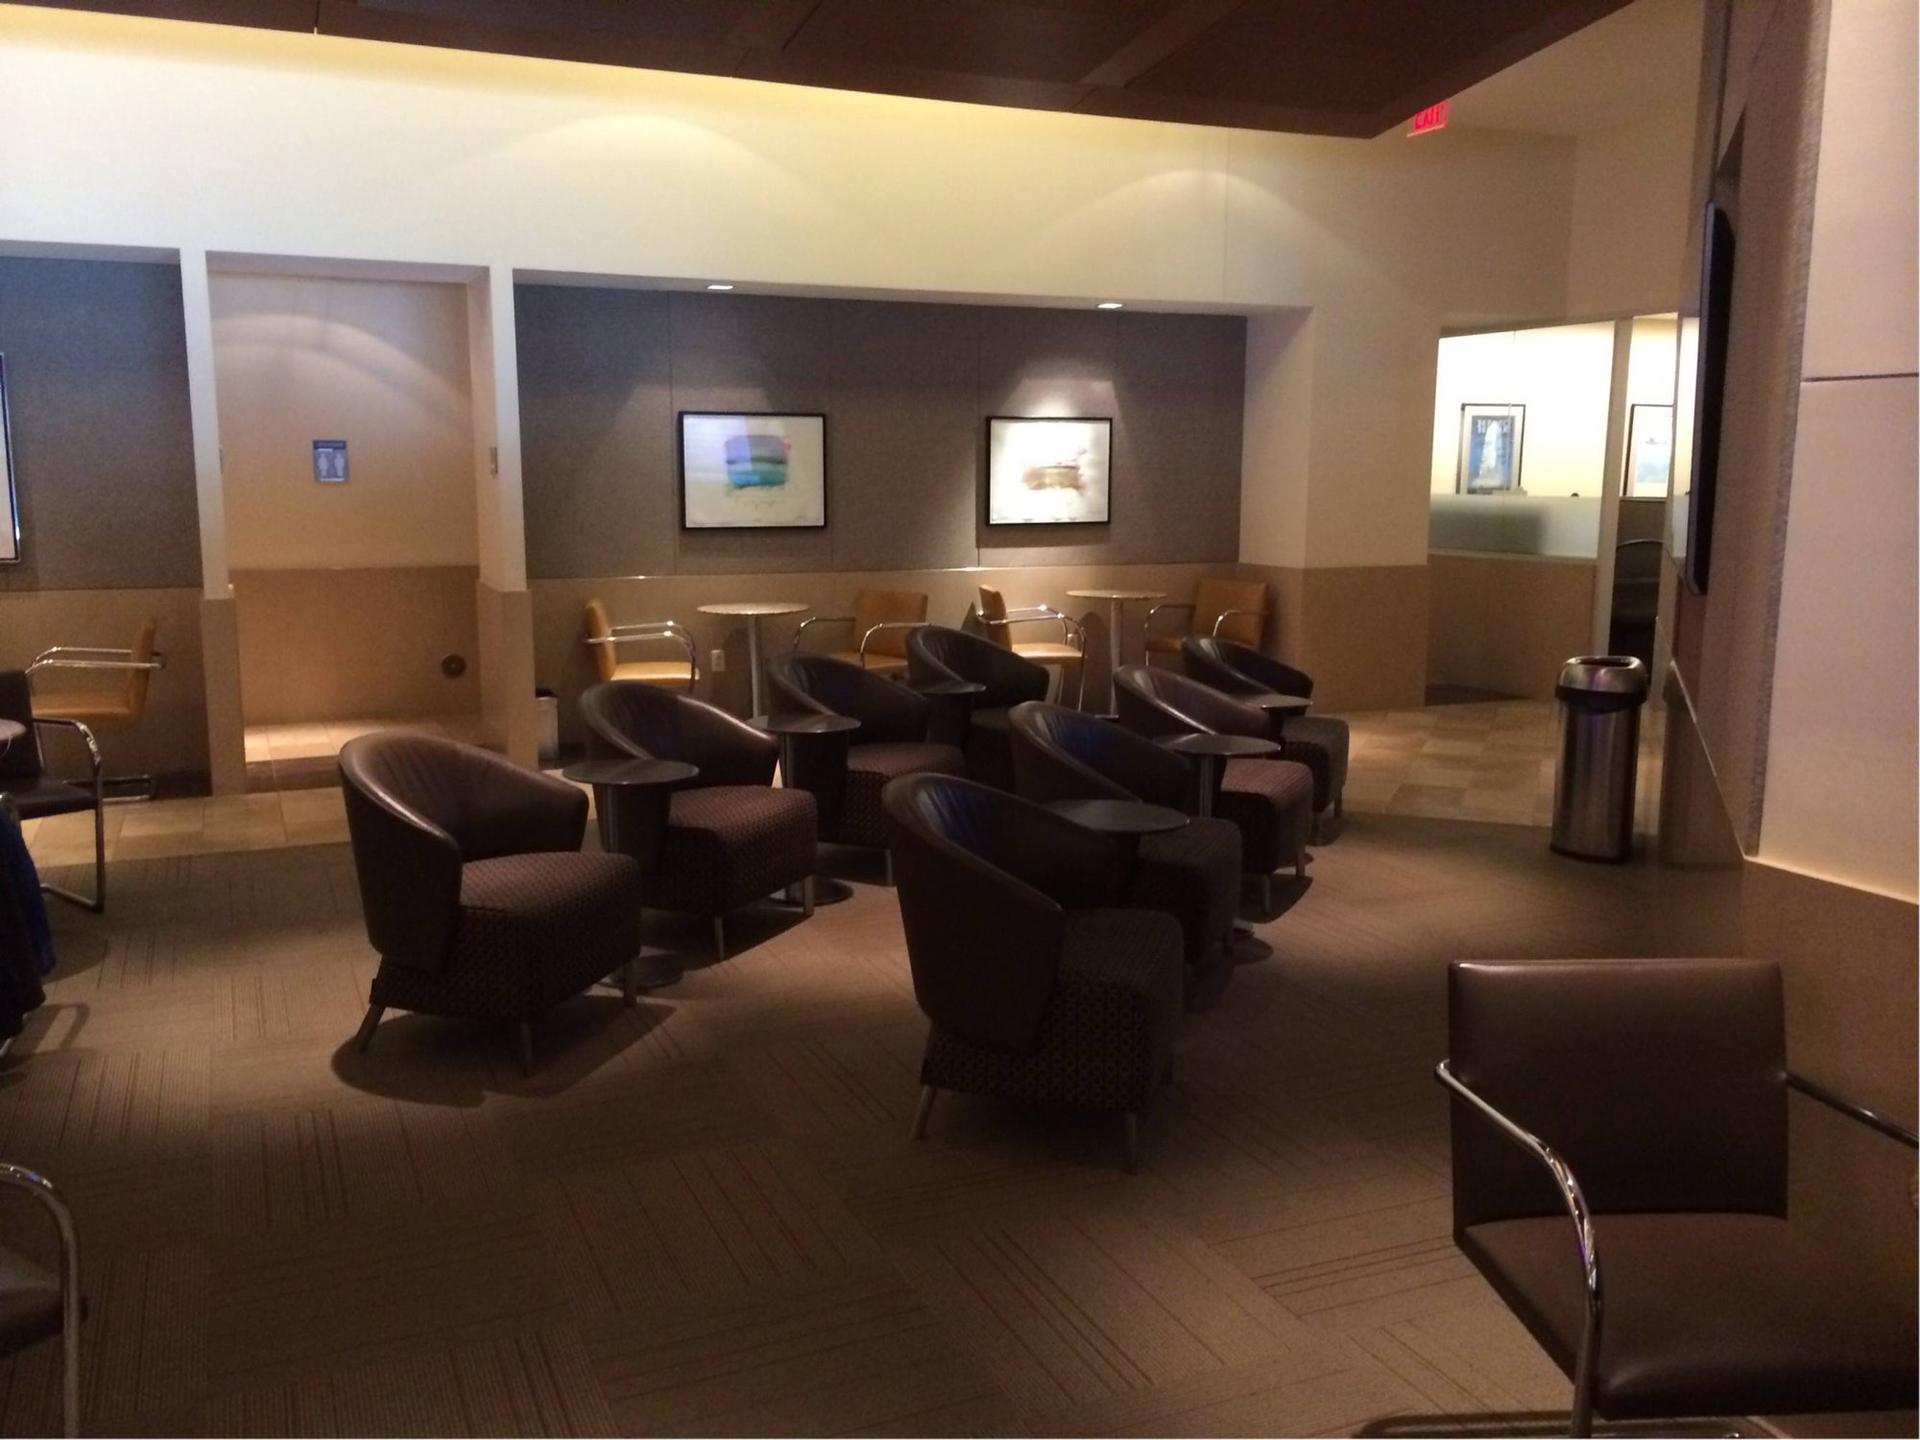 American Airlines Admirals Club image 6 of 31